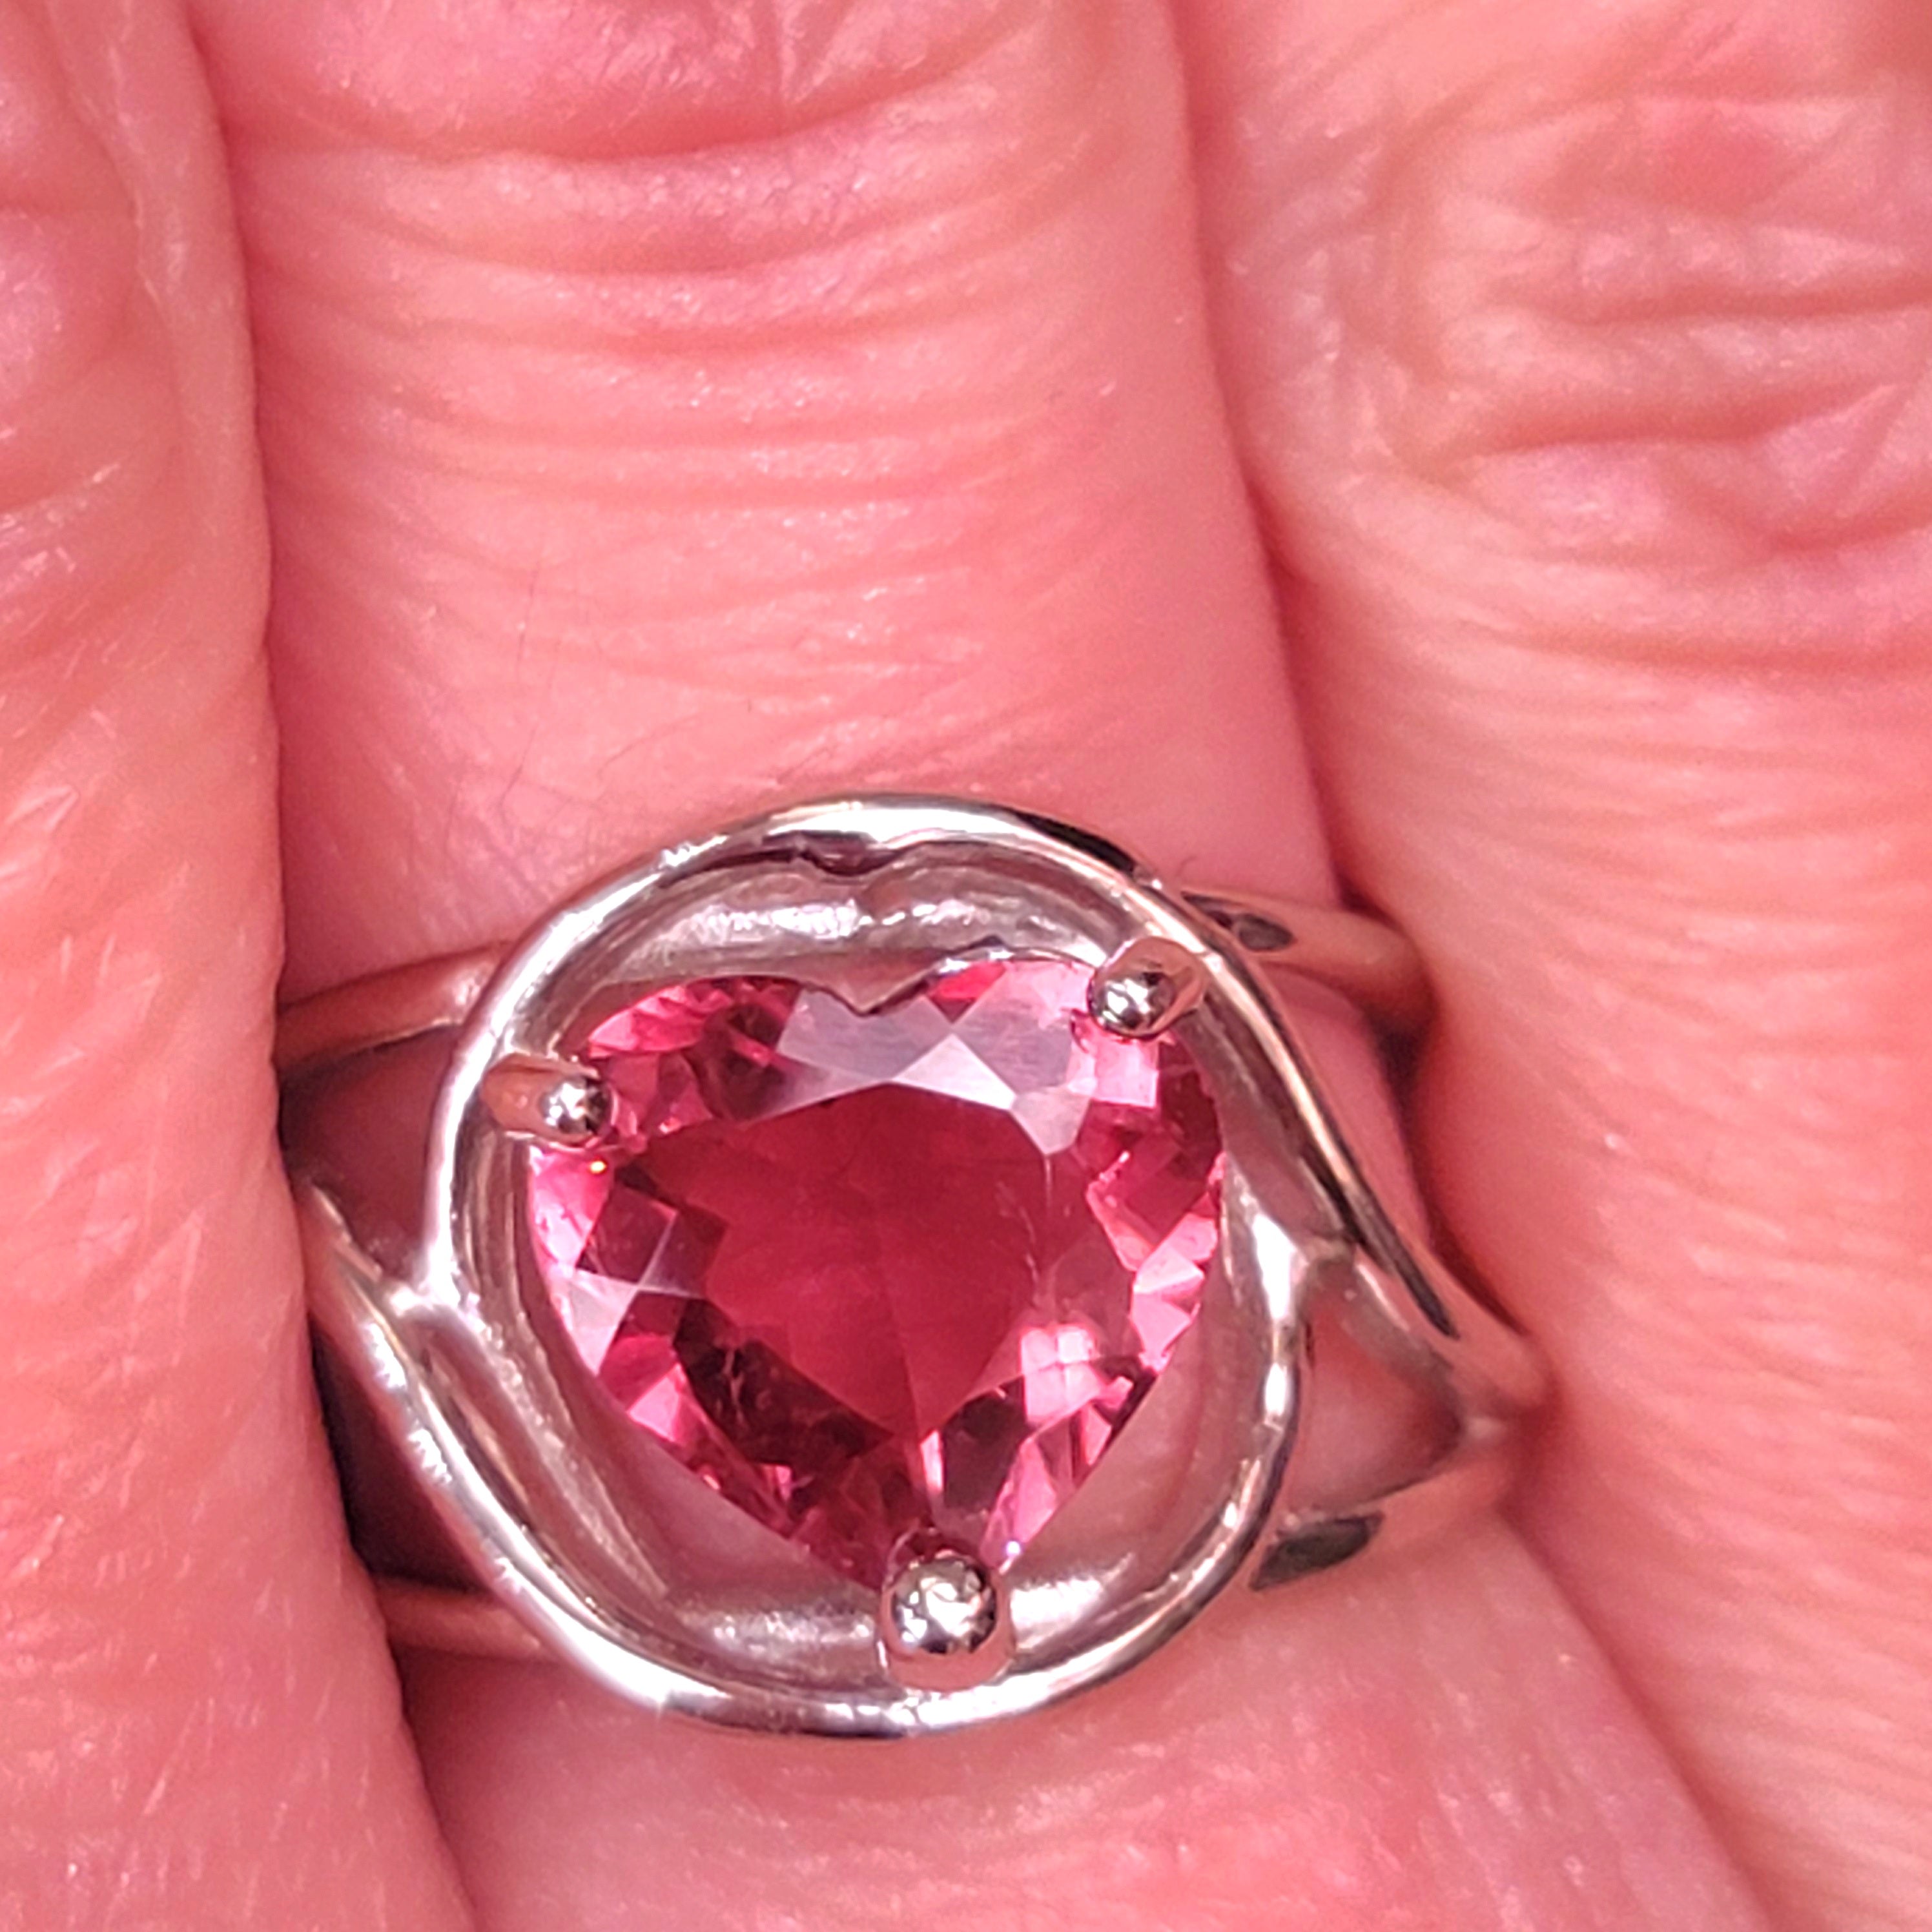 Pink Tourmaline Heart Adjustable Finger Ring for Healing, Joy and Love